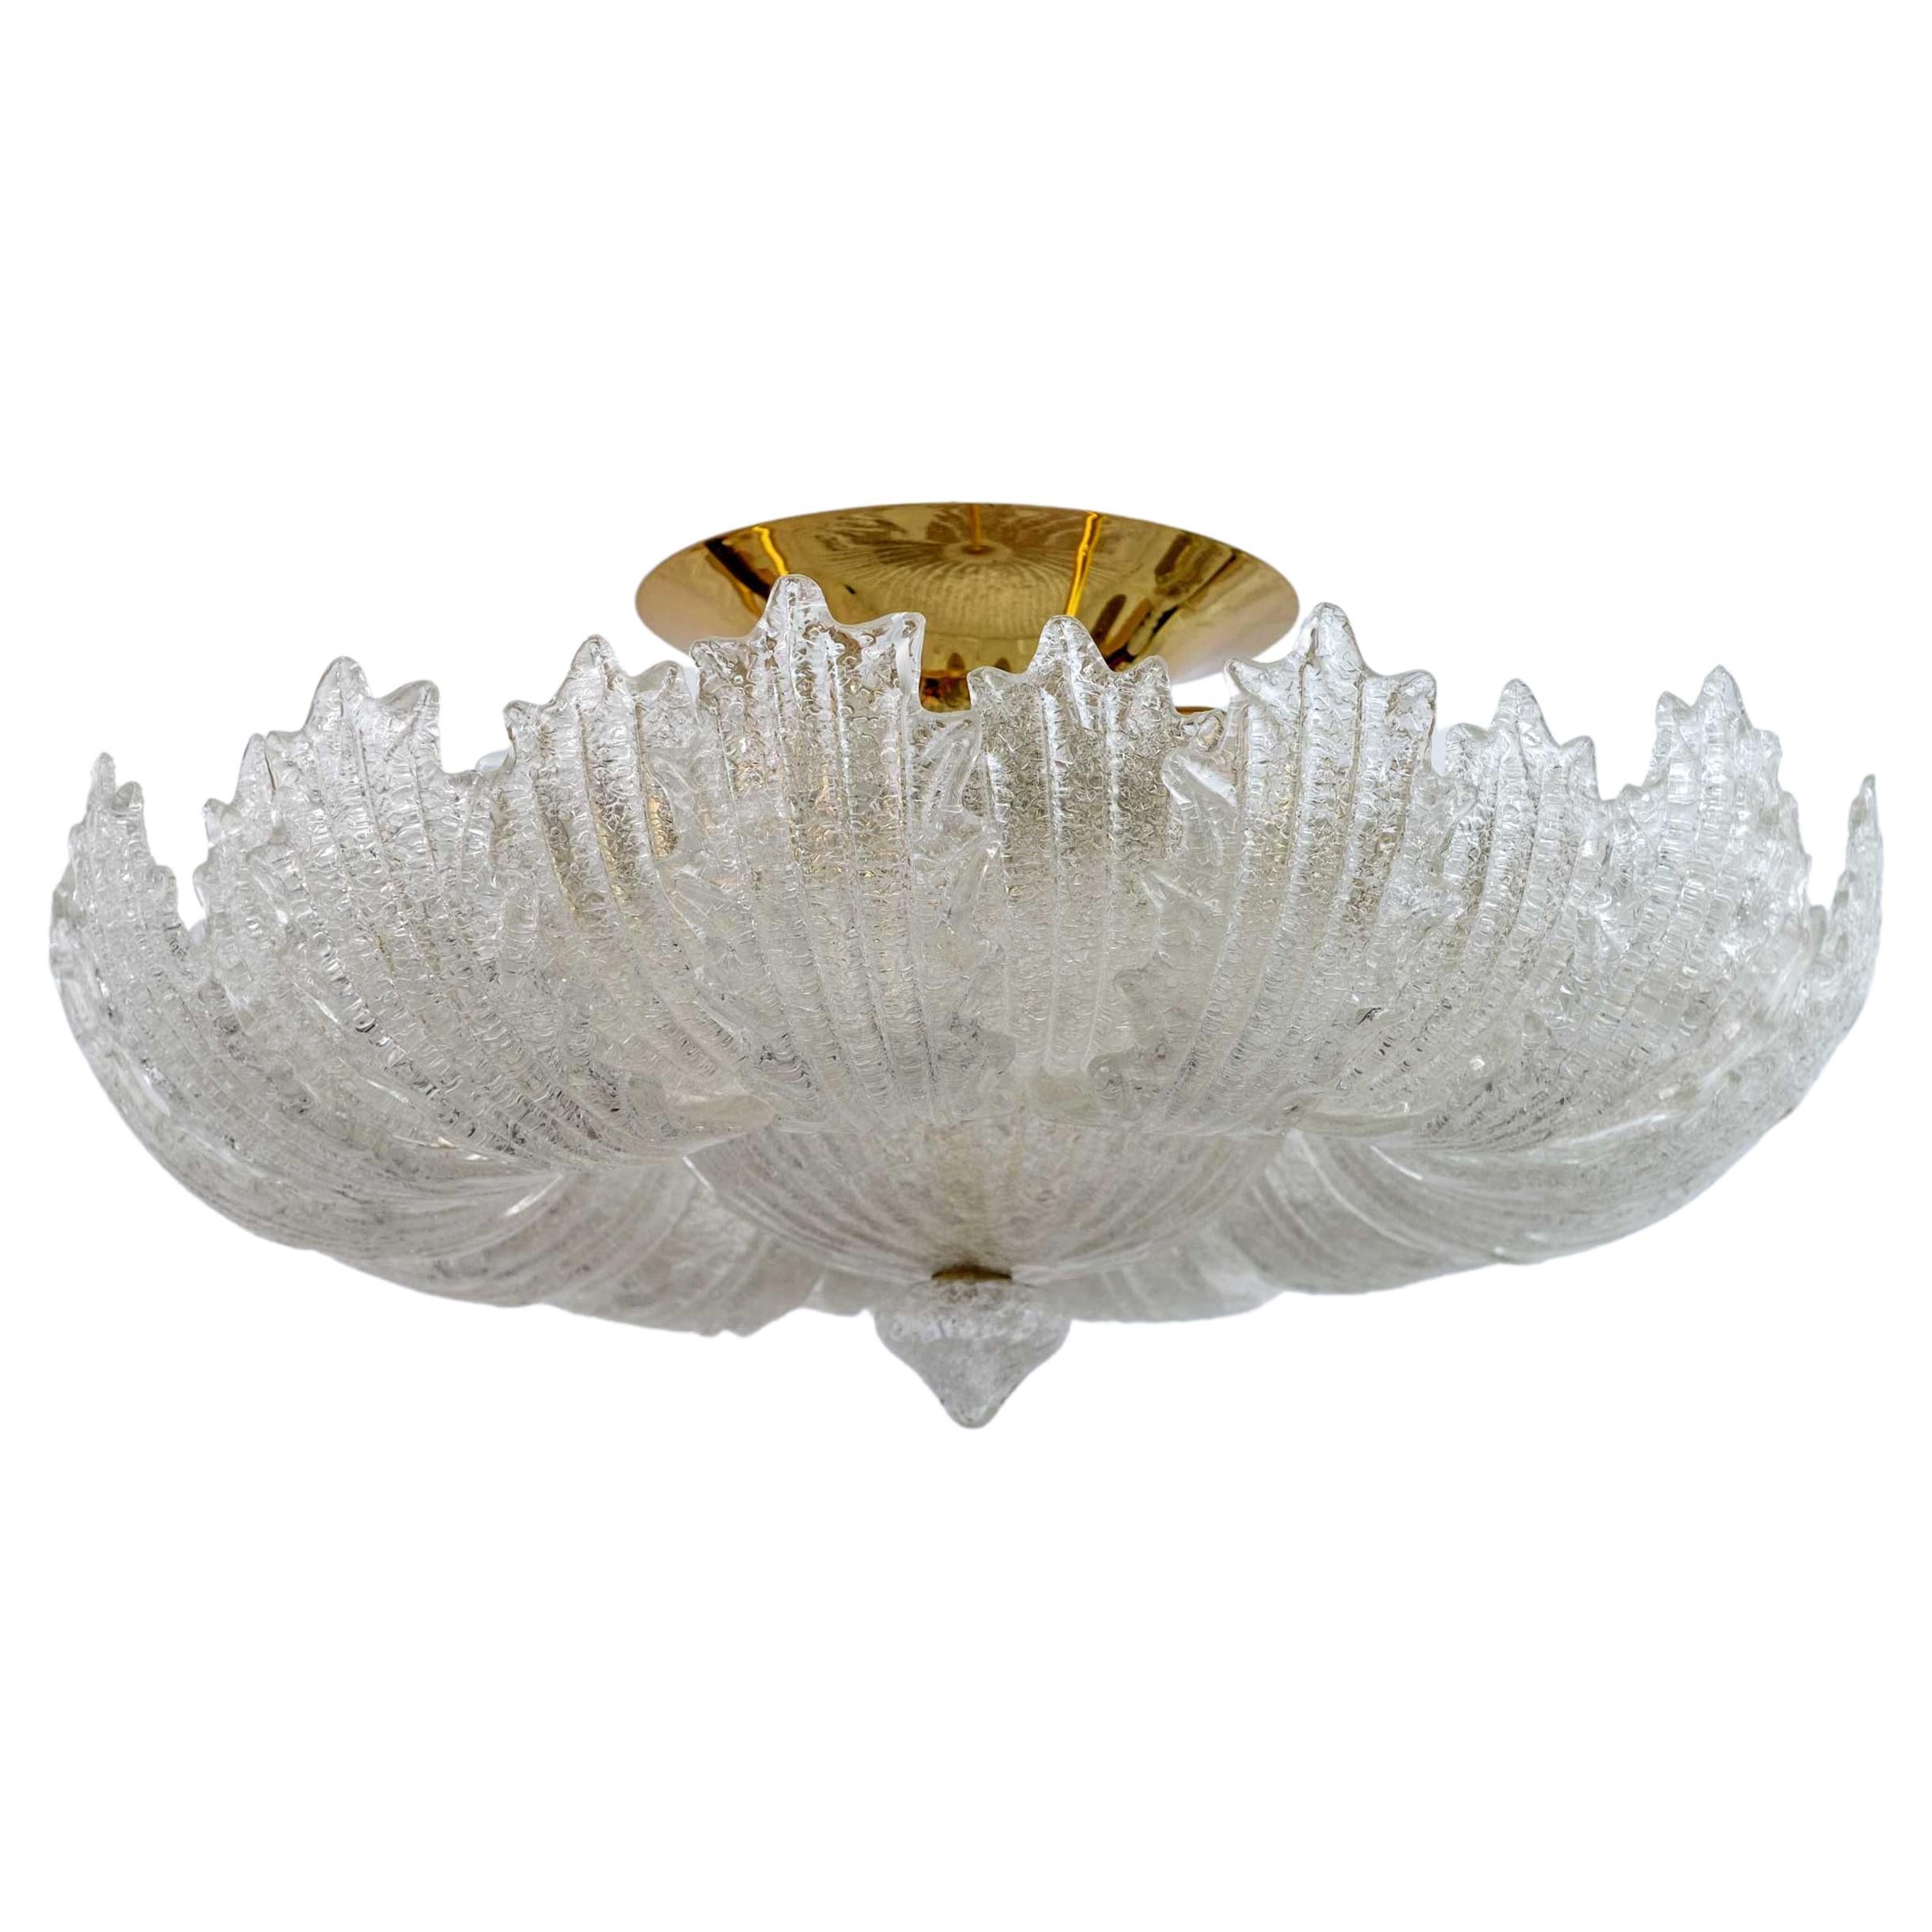 Barovier & Toso Mid-Century Modern Brass and Murano Glass Ceiling Light For Sale